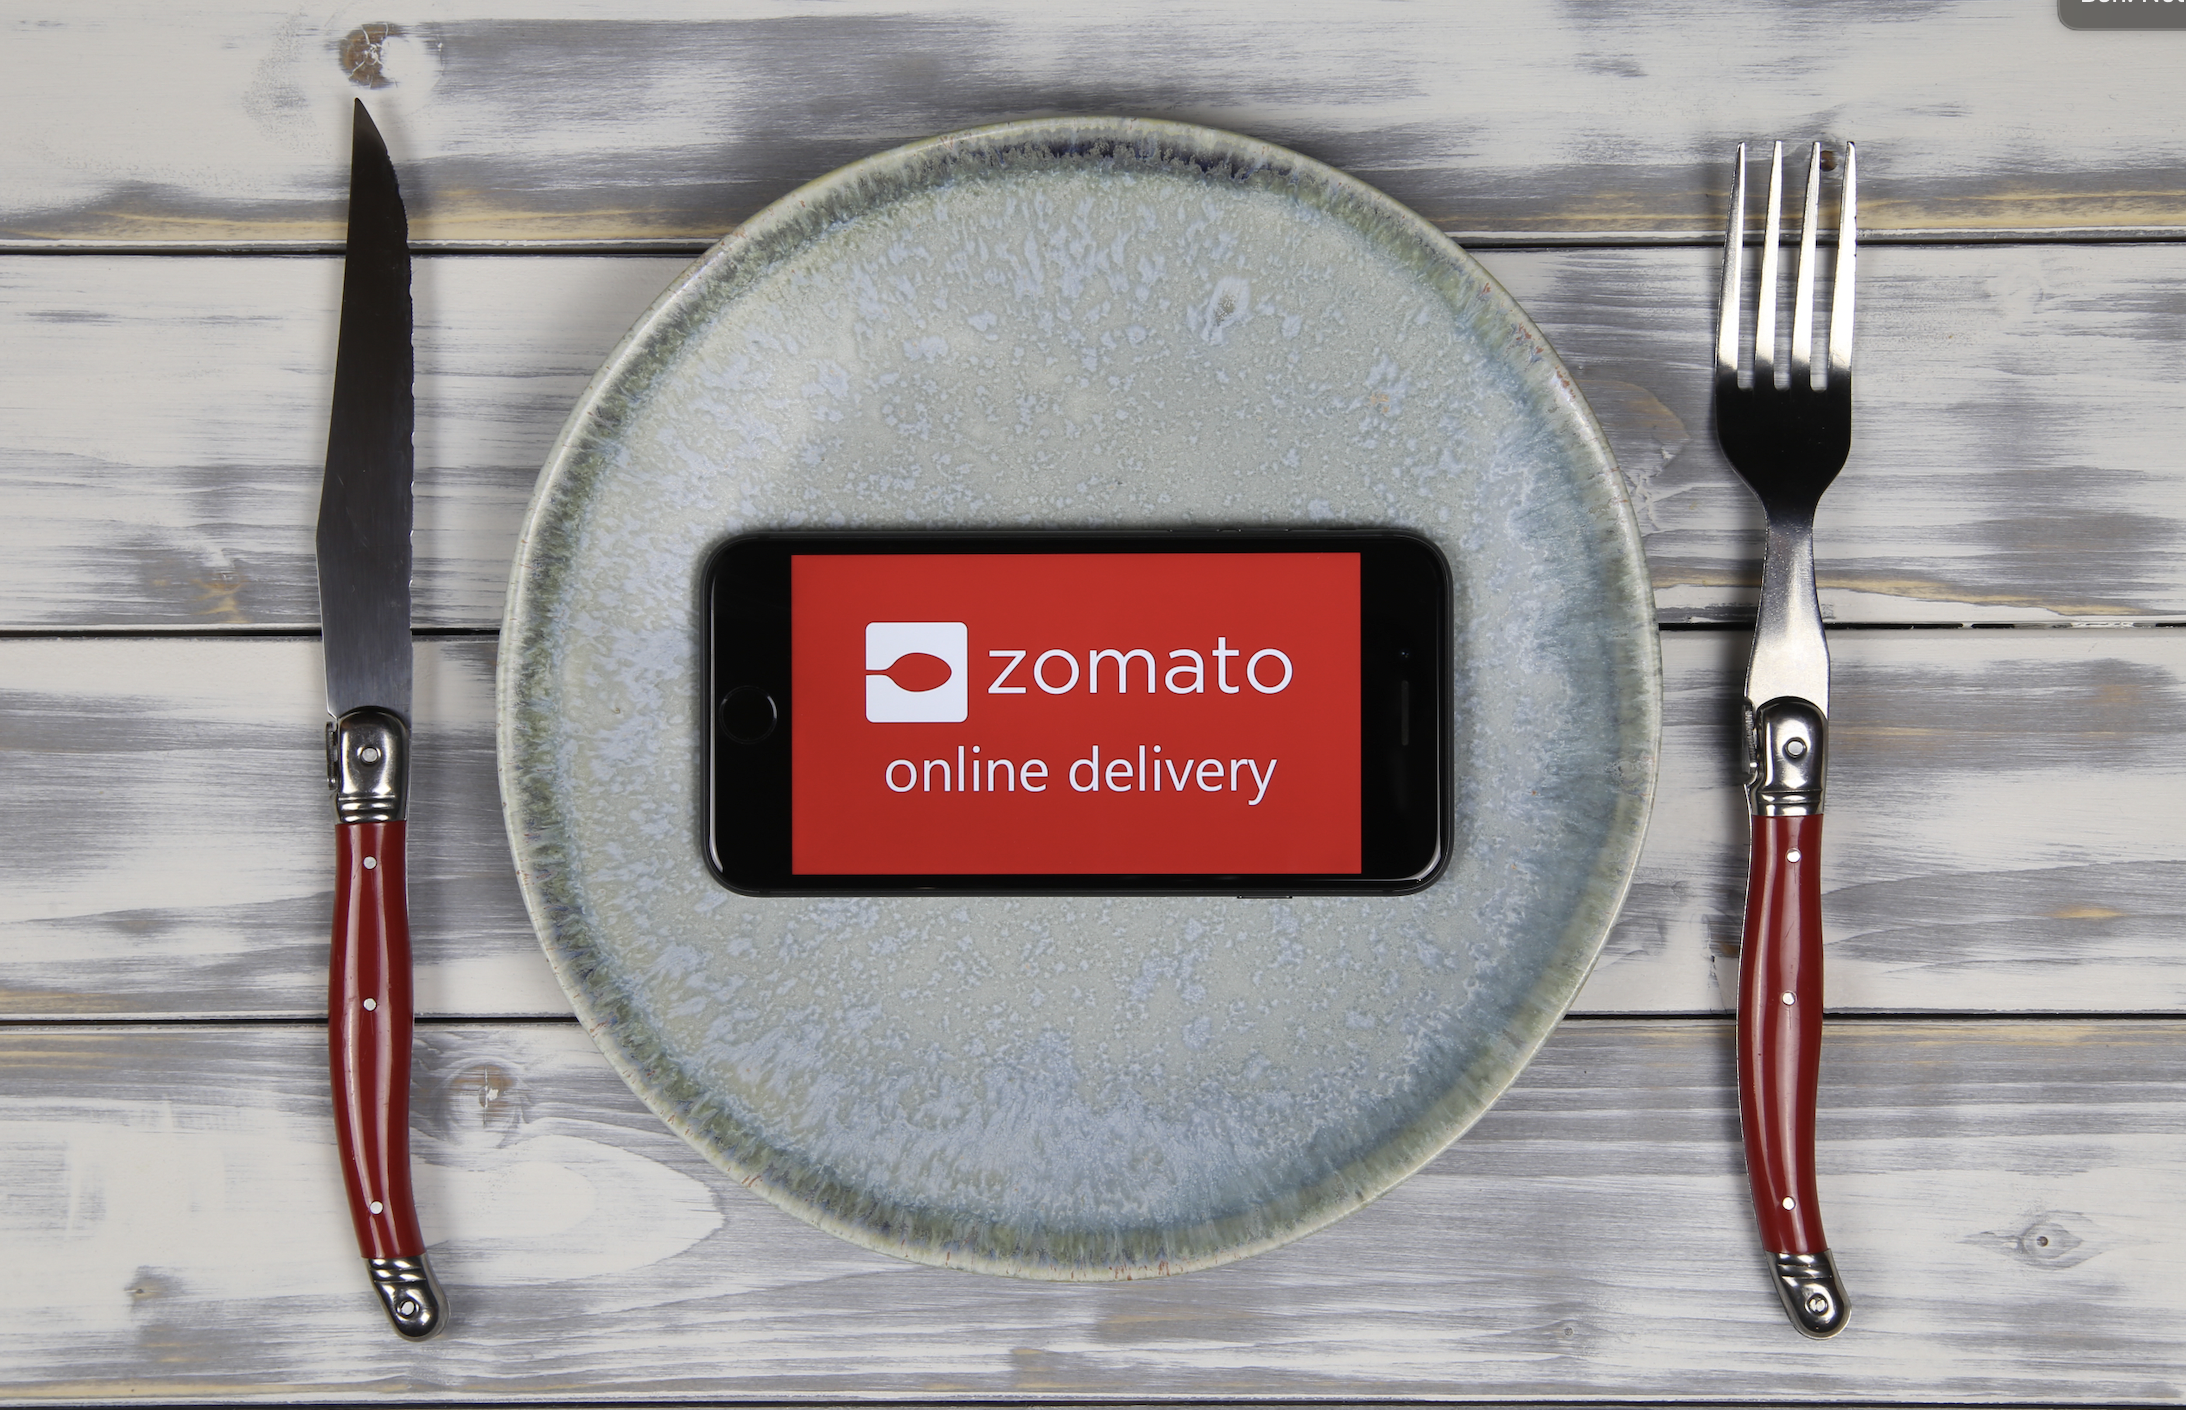 Zomato posts widened losses for Q3 2021, announces investments in Curefit, Shiprocket